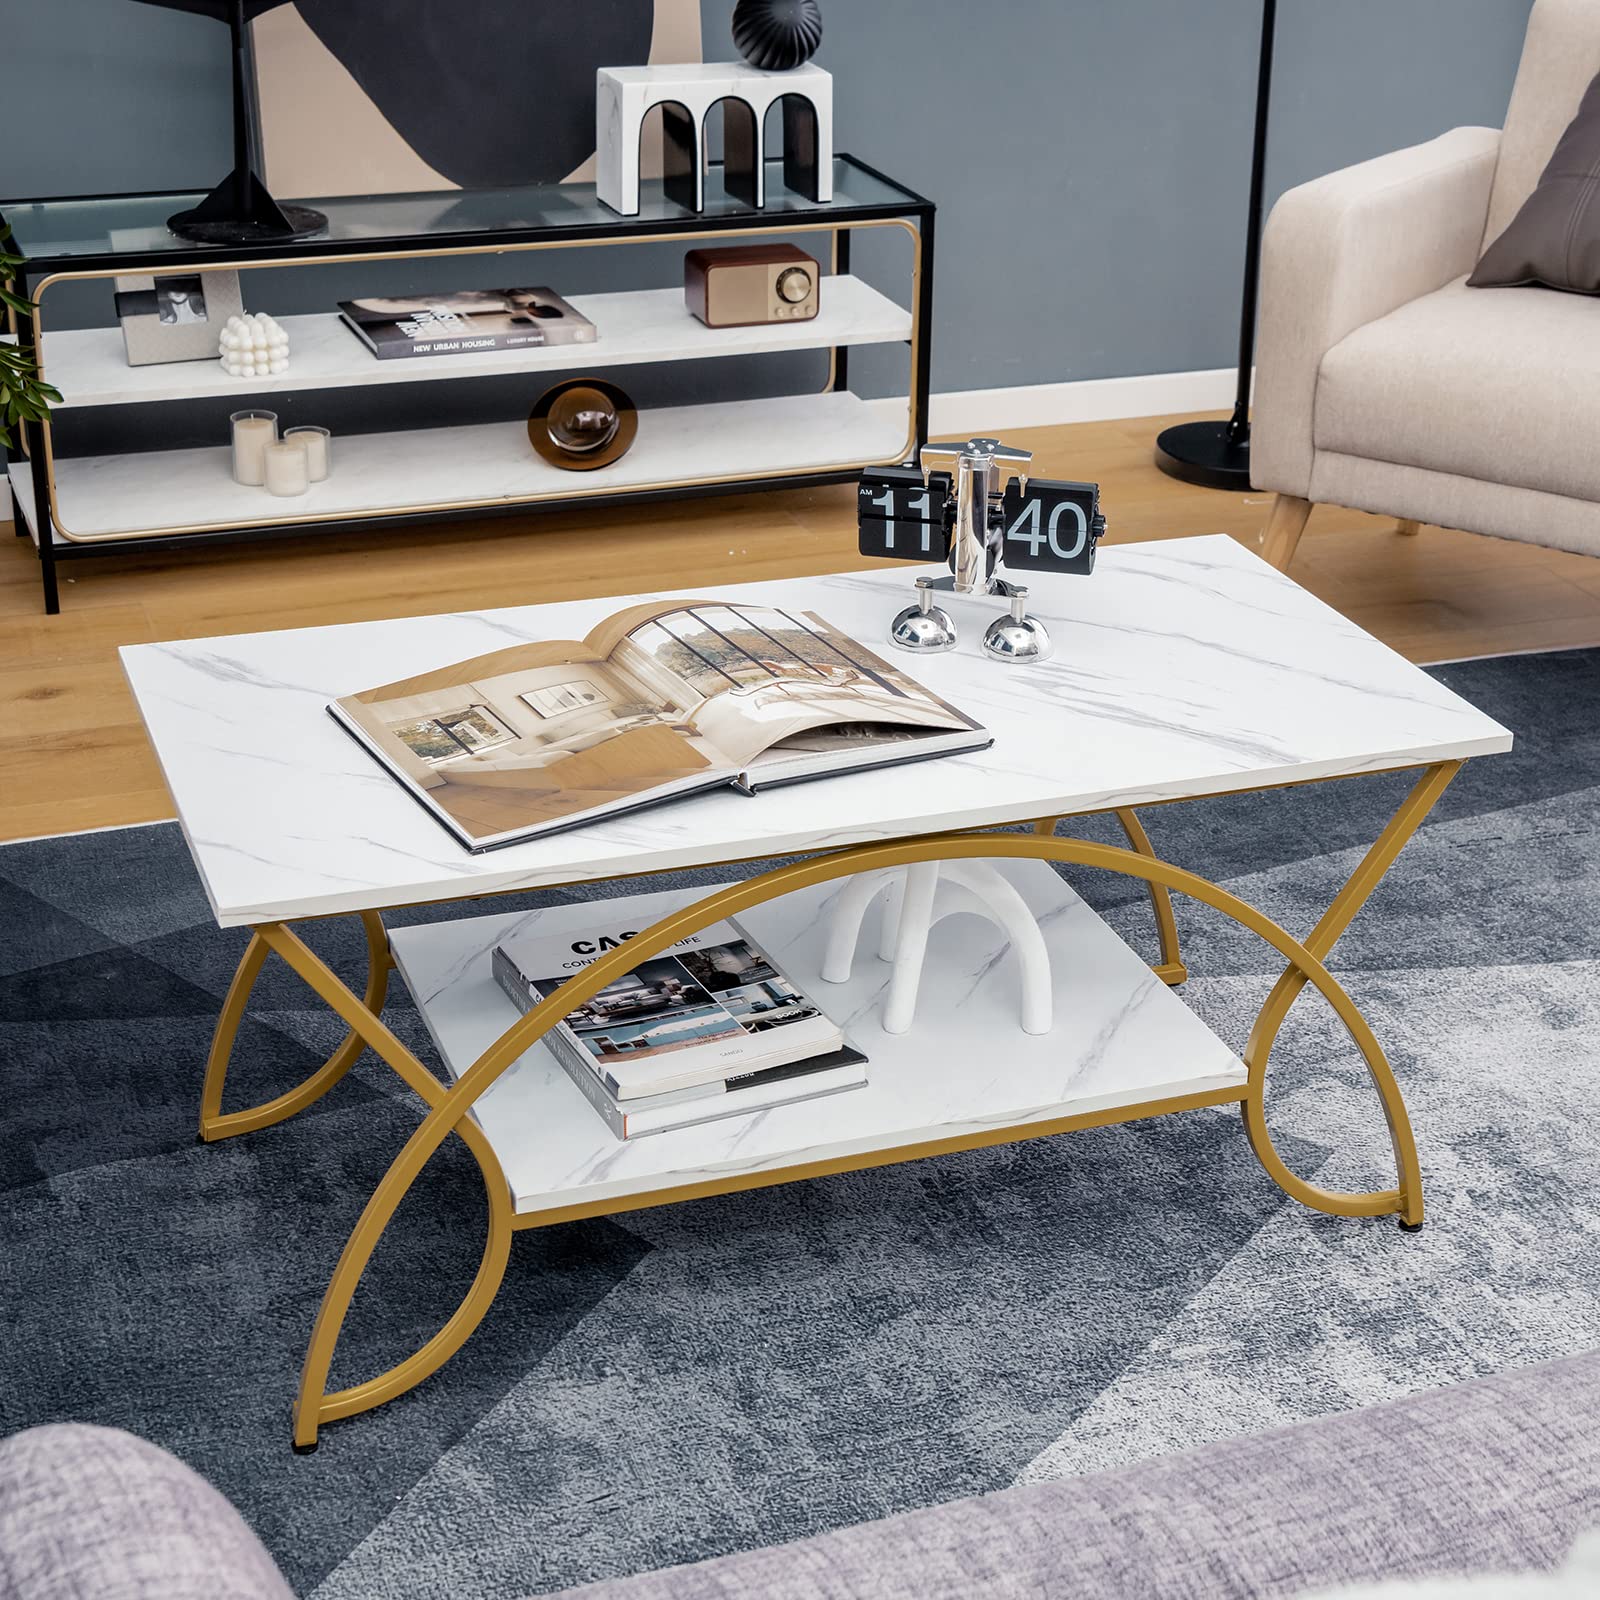 What To Take Into Consideration When Buying a Coffee Table?